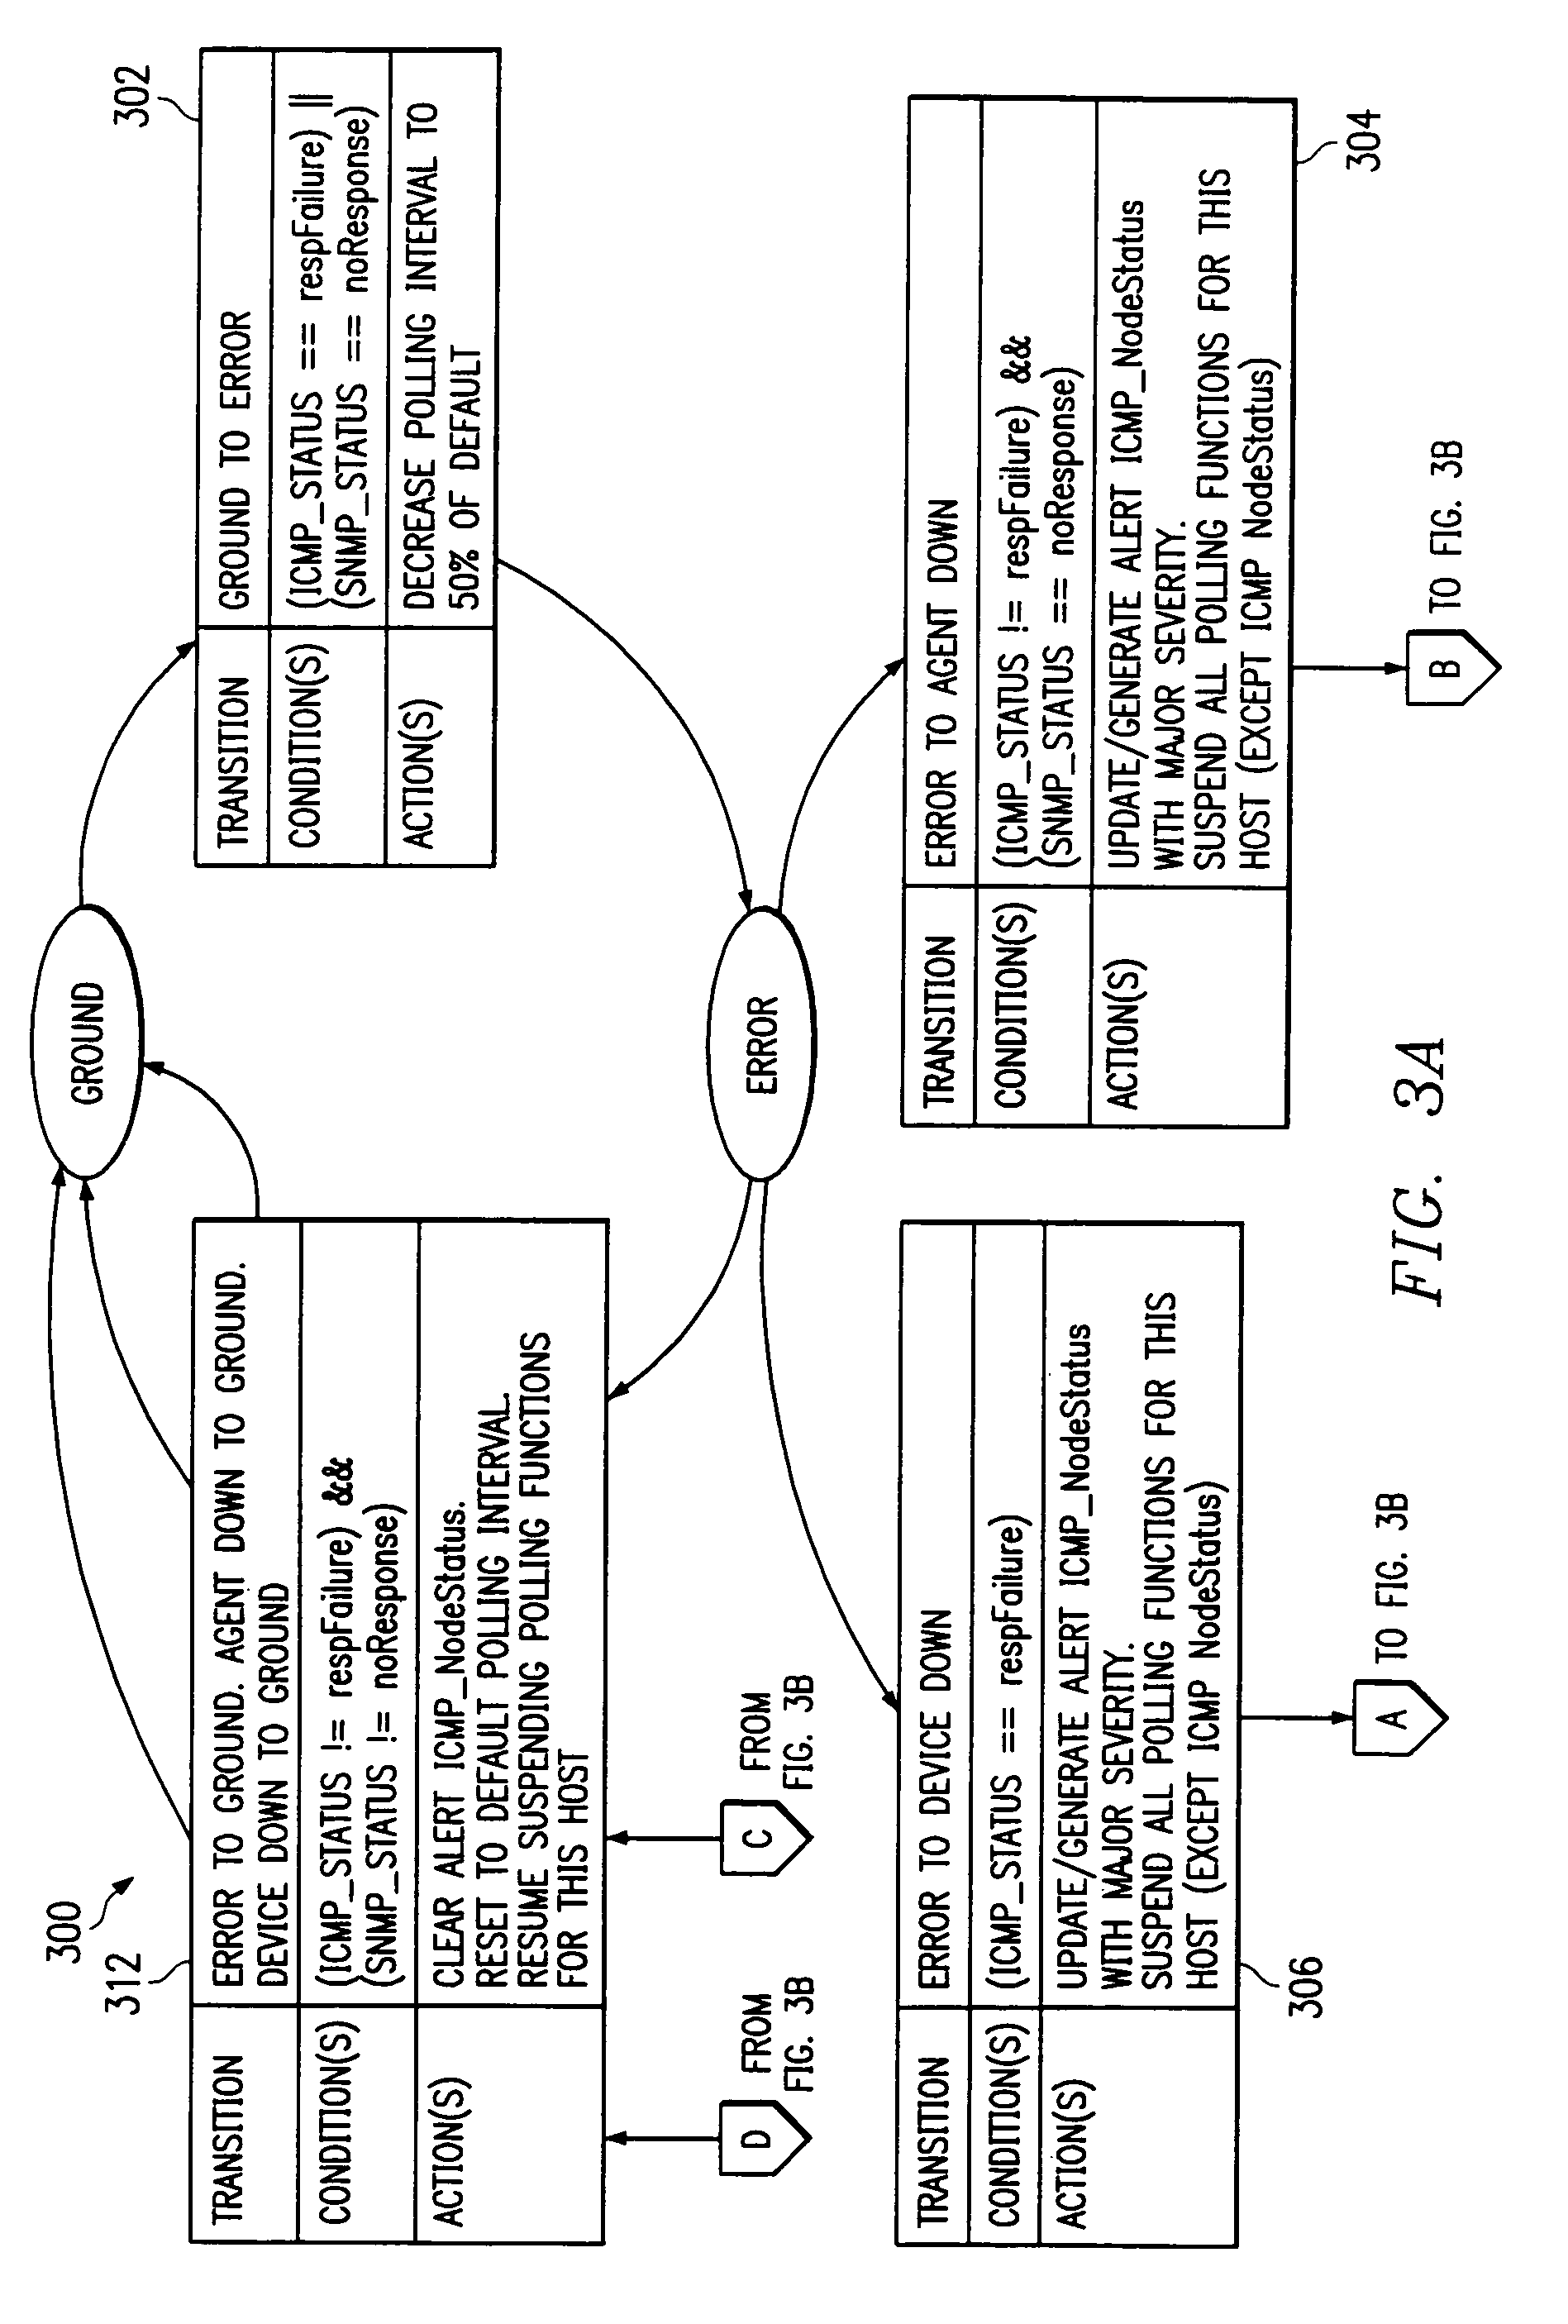 System and method for managing a communication network utilizing state-based polling